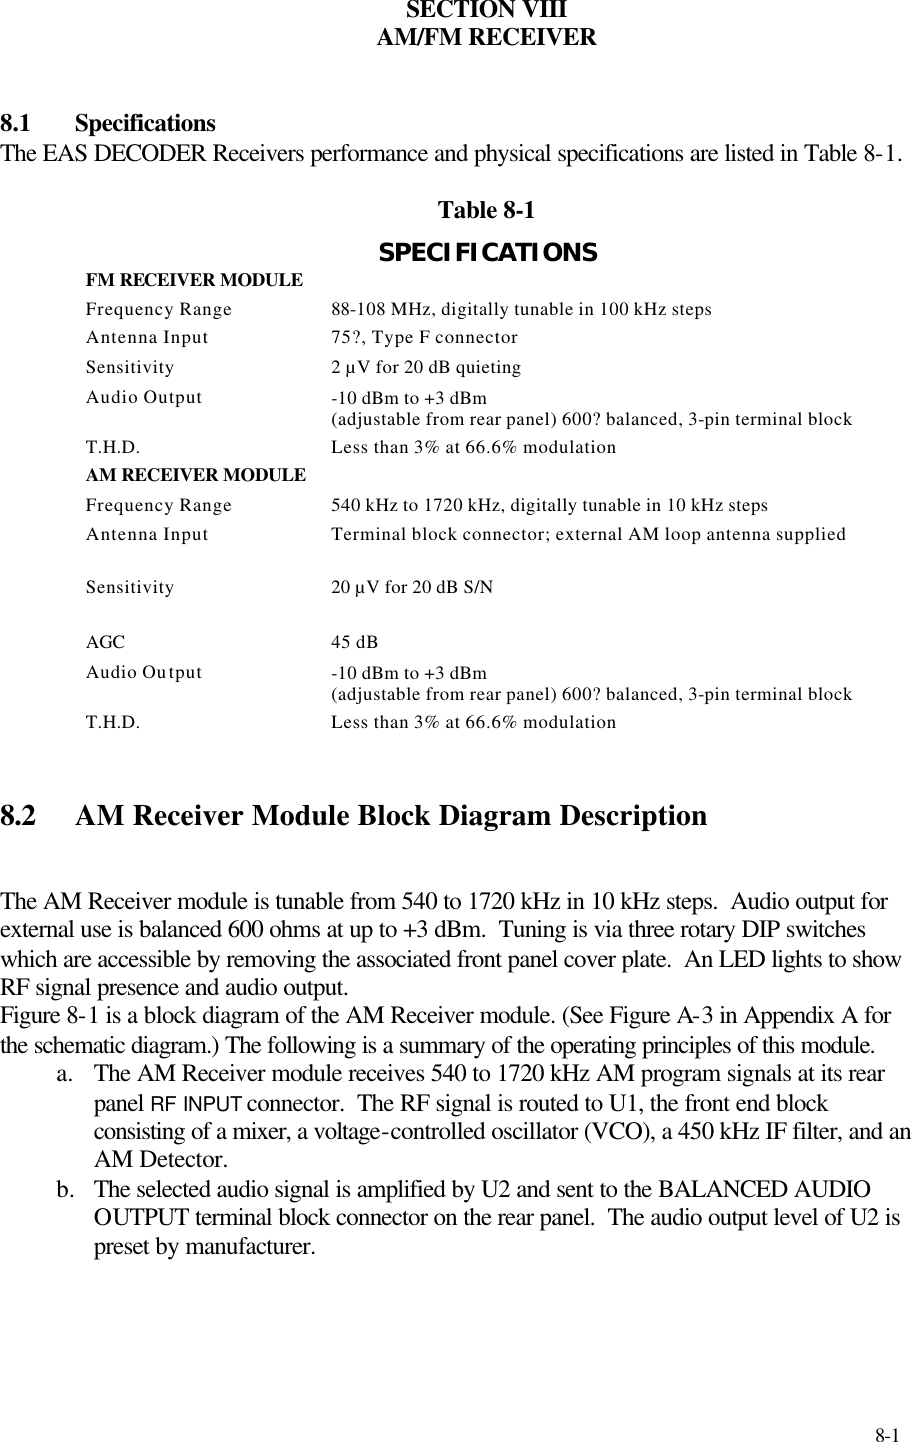     8-1  SECTION VIII AM/FM RECEIVER   8.1  Specifications The EAS DECODER Receivers performance and physical specifications are listed in Table 8-1.  Table 8-1 SPECIFICATIONS FM RECEIVER MODULE Frequency Range 88-108 MHz, digitally tunable in 100 kHz steps Antenna Input 75?, Type F connector Sensitivity 2 µV for 20 dB quieting Audio Output -10 dBm to +3 dBm (adjustable from rear panel) 600? balanced, 3-pin terminal block T.H.D. Less than 3% at 66.6% modulation AM RECEIVER MODULE Frequency Range 540 kHz to 1720 kHz, digitally tunable in 10 kHz steps Antenna Input Terminal block connector; external AM loop antenna supplied  Sensitivity 20 µV for 20 dB S/N  AGC 45 dB Audio Output -10 dBm to +3 dBm (adjustable from rear panel) 600? balanced, 3-pin terminal block T.H.D. Less than 3% at 66.6% modulation  8.2 AM Receiver Module Block Diagram Description  The AM Receiver module is tunable from 540 to 1720 kHz in 10 kHz steps.  Audio output for external use is balanced 600 ohms at up to +3 dBm.  Tuning is via three rotary DIP switches which are accessible by removing the associated front panel cover plate.  An LED lights to show RF signal presence and audio output. Figure 8-1 is a block diagram of the AM Receiver module. (See Figure A-3 in Appendix A for the schematic diagram.) The following is a summary of the operating principles of this module. a. The AM Receiver module receives 540 to 1720 kHz AM program signals at its rear panel RF INPUT connector.  The RF signal is routed to U1, the front end block consisting of a mixer, a voltage-controlled oscillator (VCO), a 450 kHz IF filter, and an AM Detector.   b.  The selected audio signal is amplified by U2 and sent to the BALANCED AUDIO OUTPUT terminal block connector on the rear panel.  The audio output level of U2 is preset by manufacturer. 